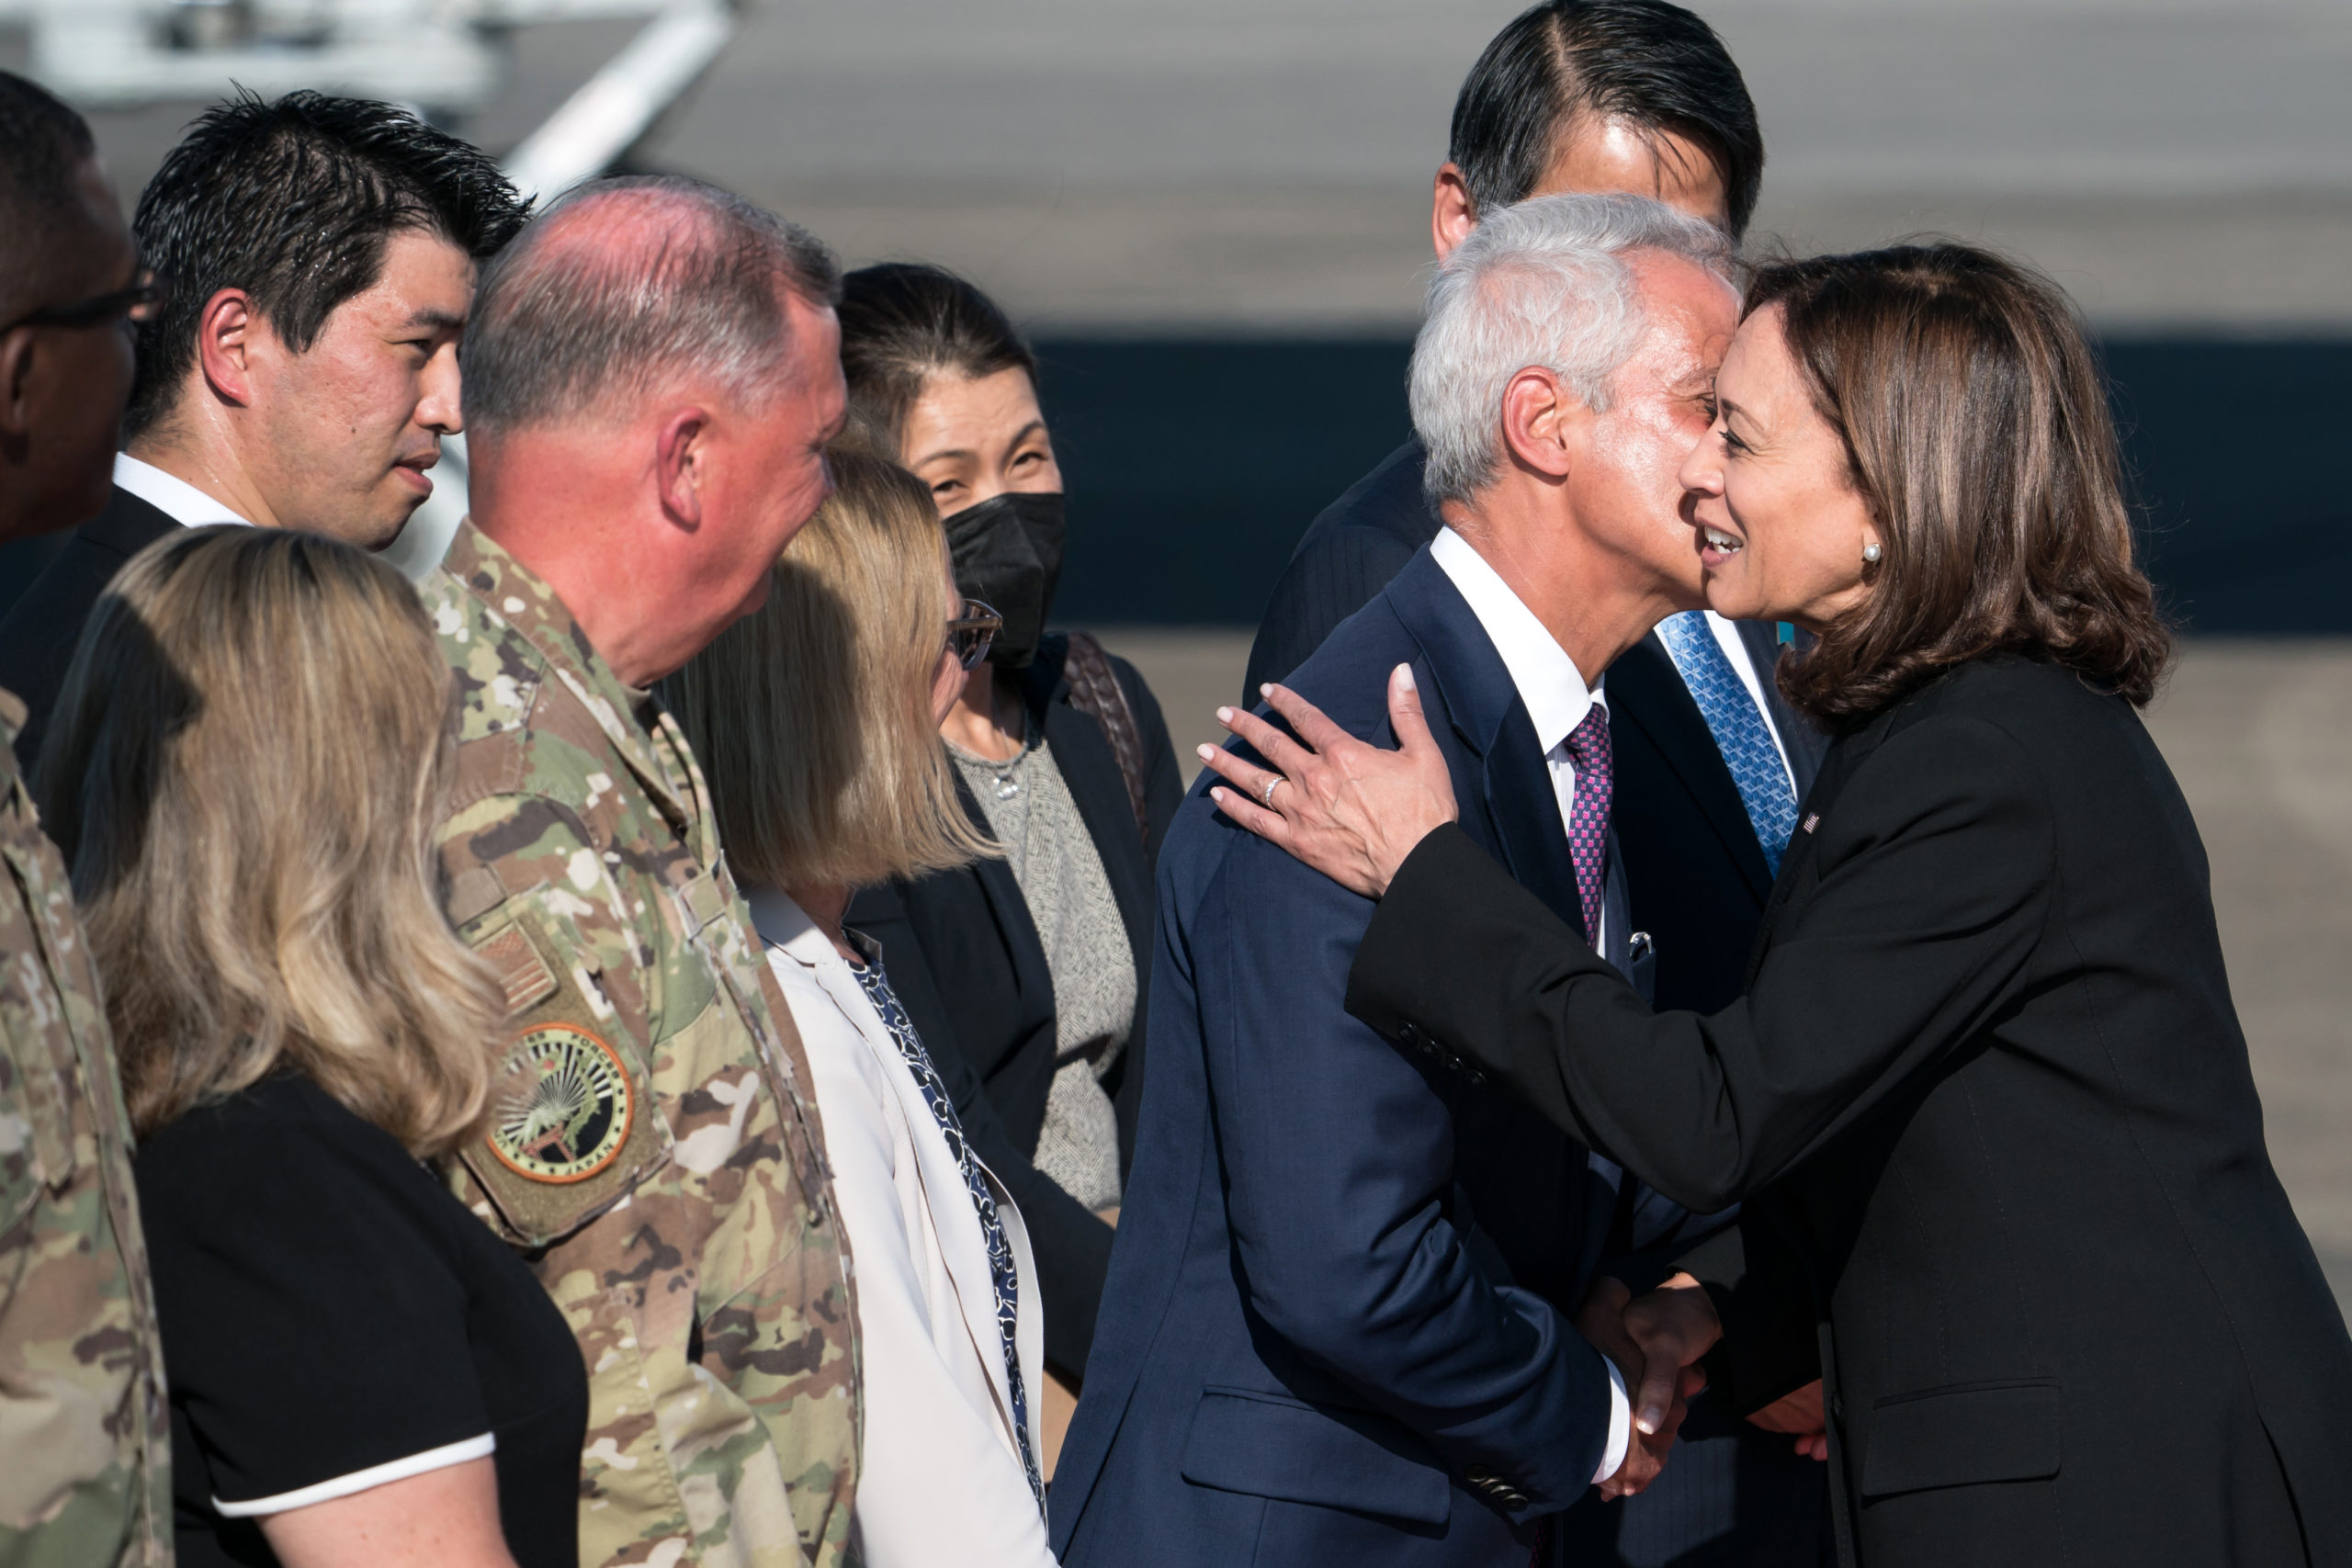 U.S. Vice President Kamala Harris (R) is greeted by U.S. Ambassador to Japan Rahm Emanuel arrives at the Yokota Air Base on 26 September 2022, in Fussa, Tokyo, Japan. Dignitaries including several current and former heads of state are visiting Japan for the state funeral of former prime minister Shinzo Abe, which will be held on Tuesday. (Photo by Tomohiro Ohsumi/Getty Images)